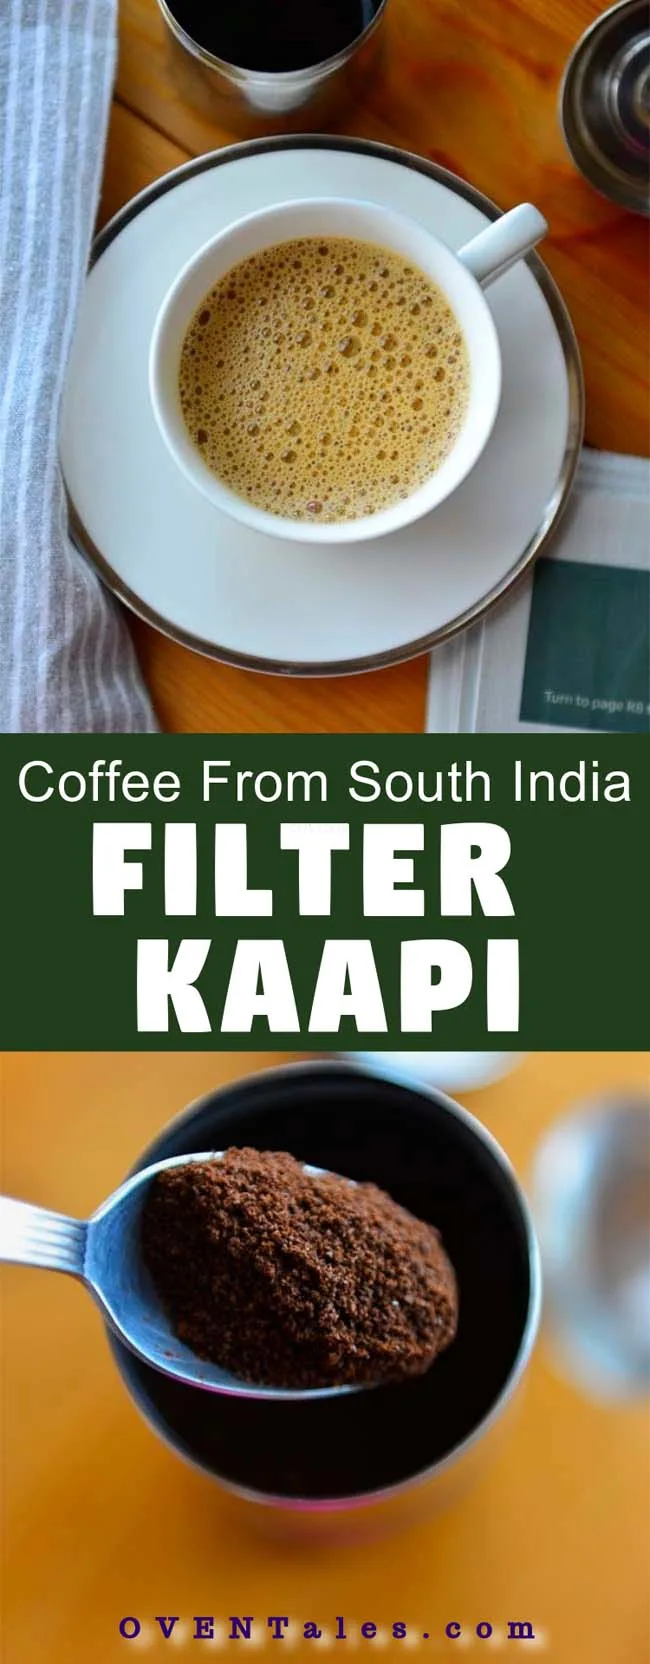 South Indian Filter Coffee - Aromatic percolated coffee served with hot frothy milk